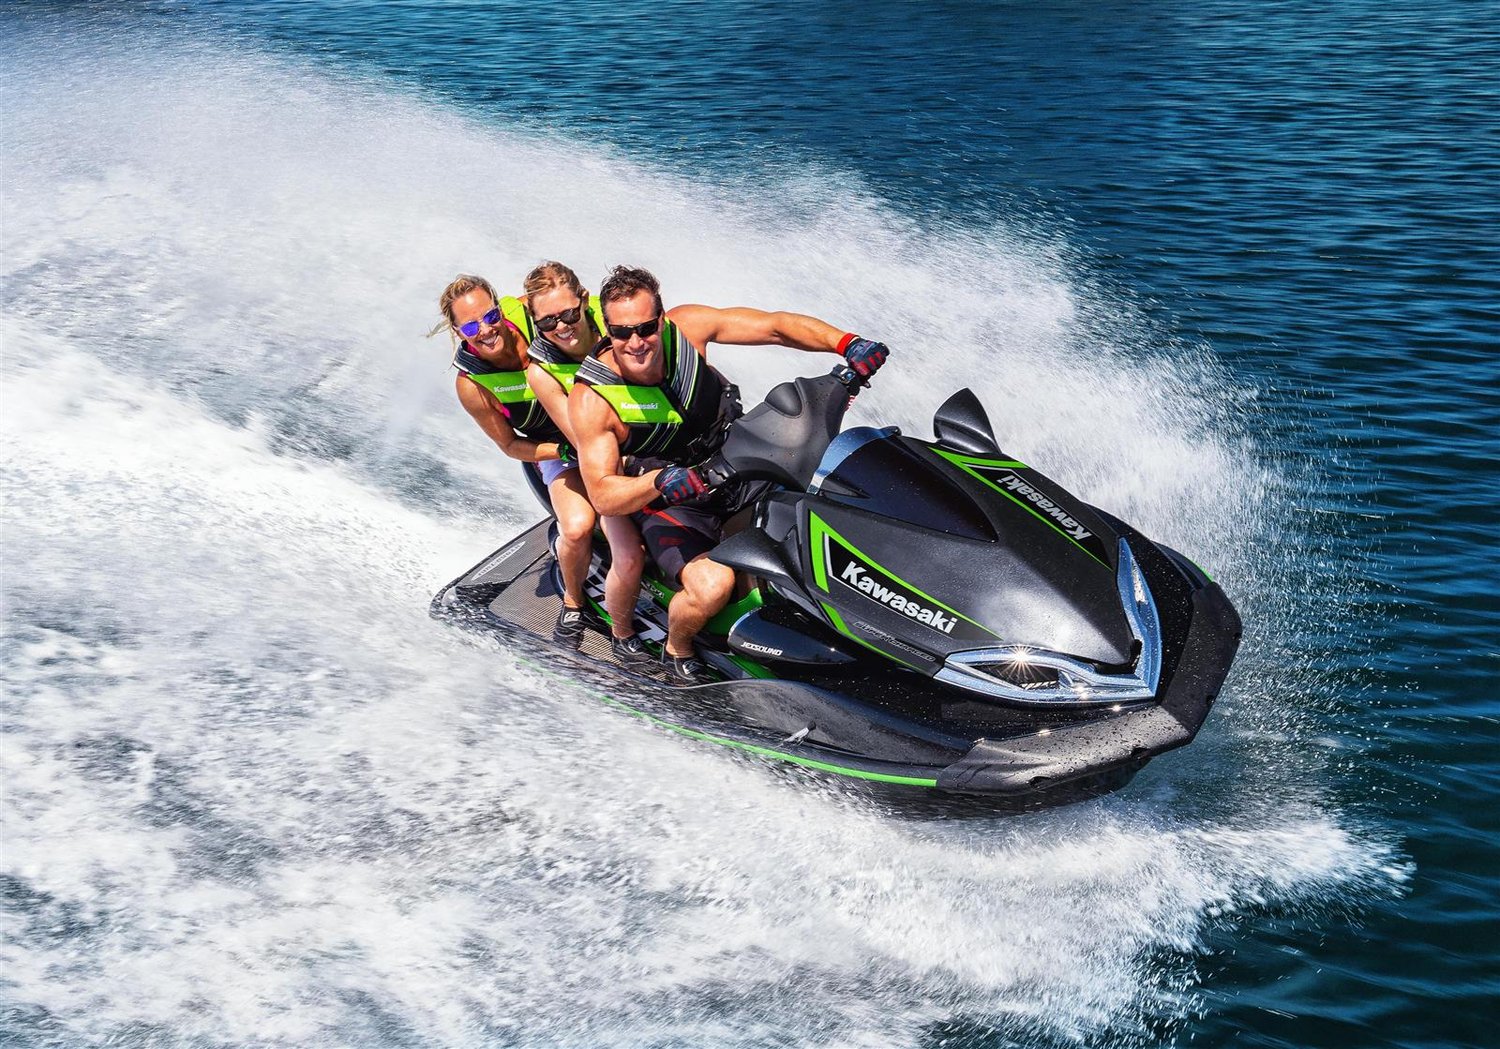 The Top 7 Best Jet Skis for 2021